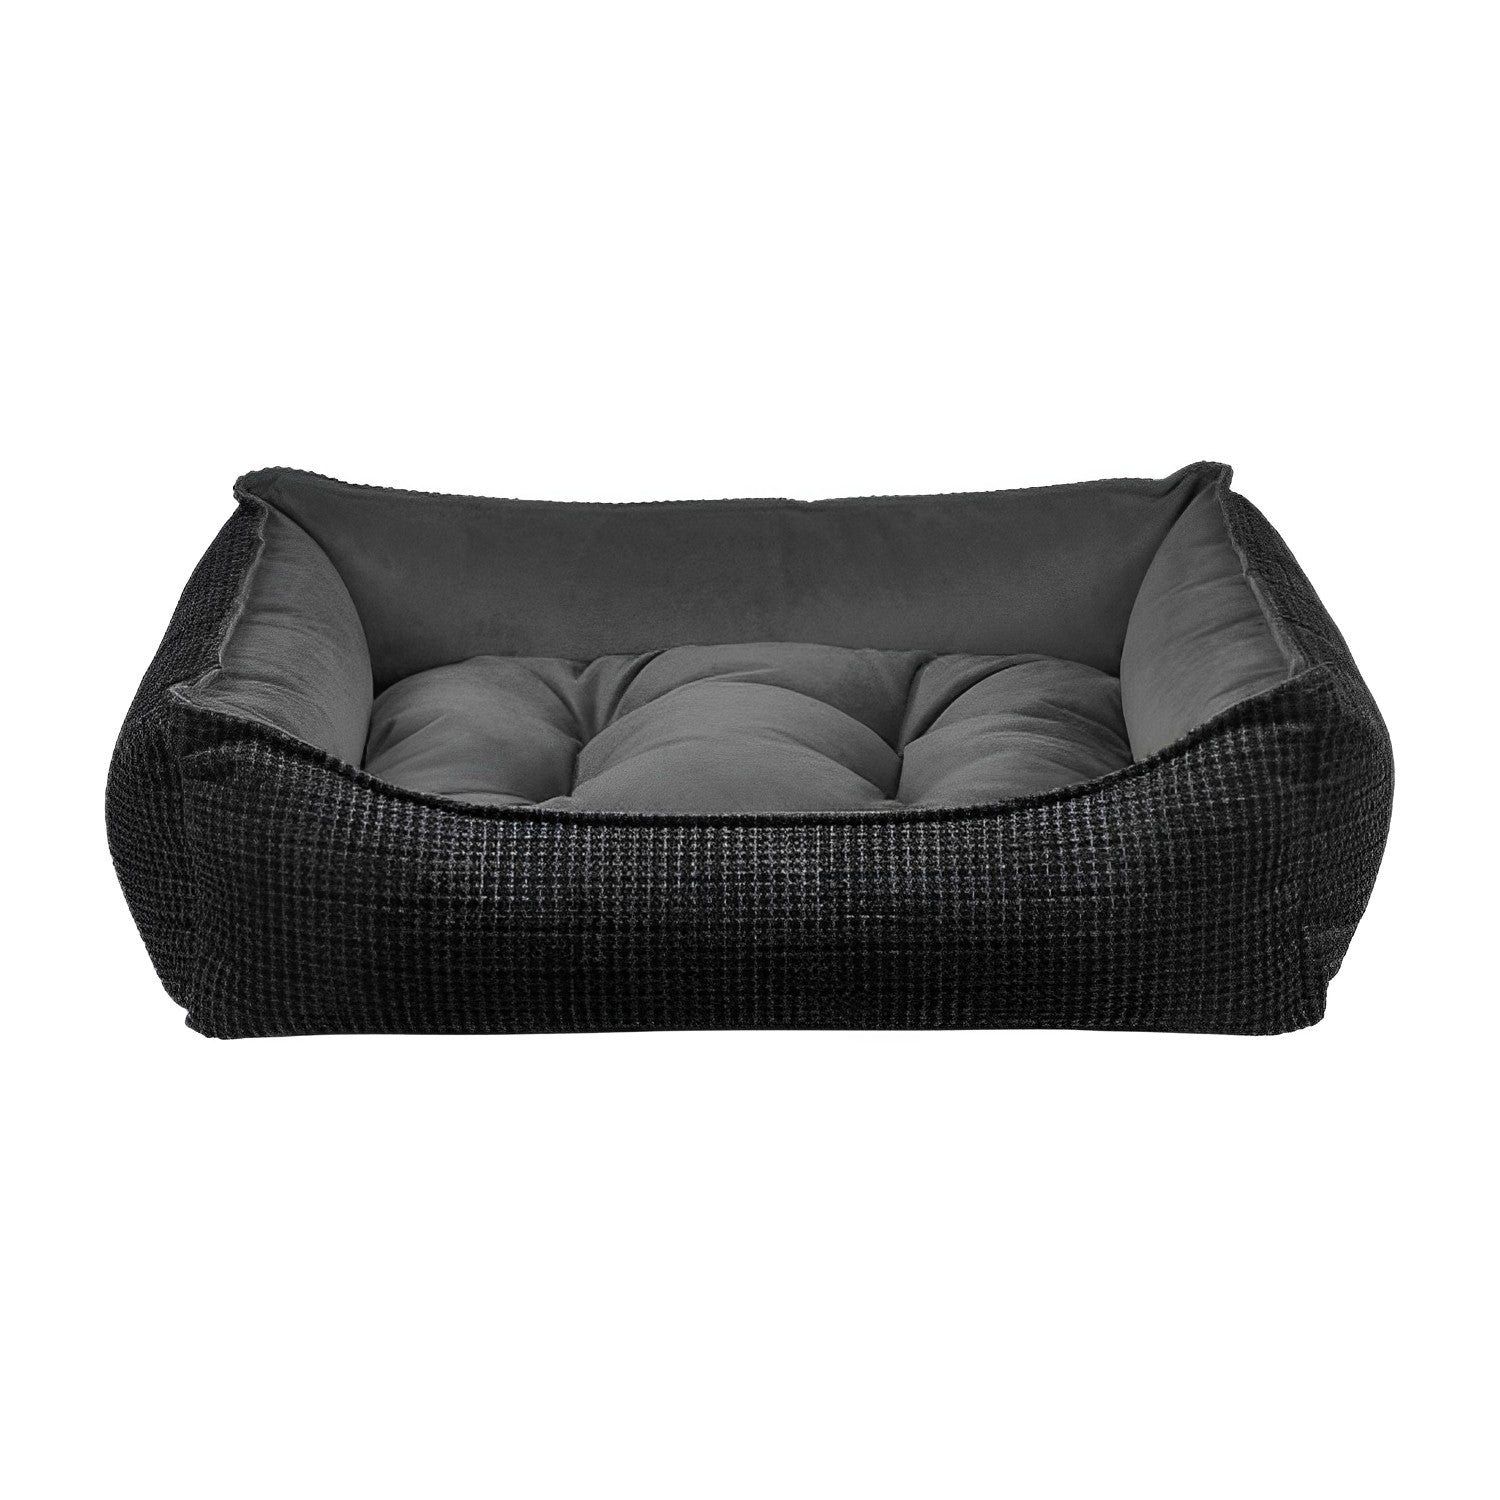 Puppy Fever Pro Premium Puppy Package Dog Bed